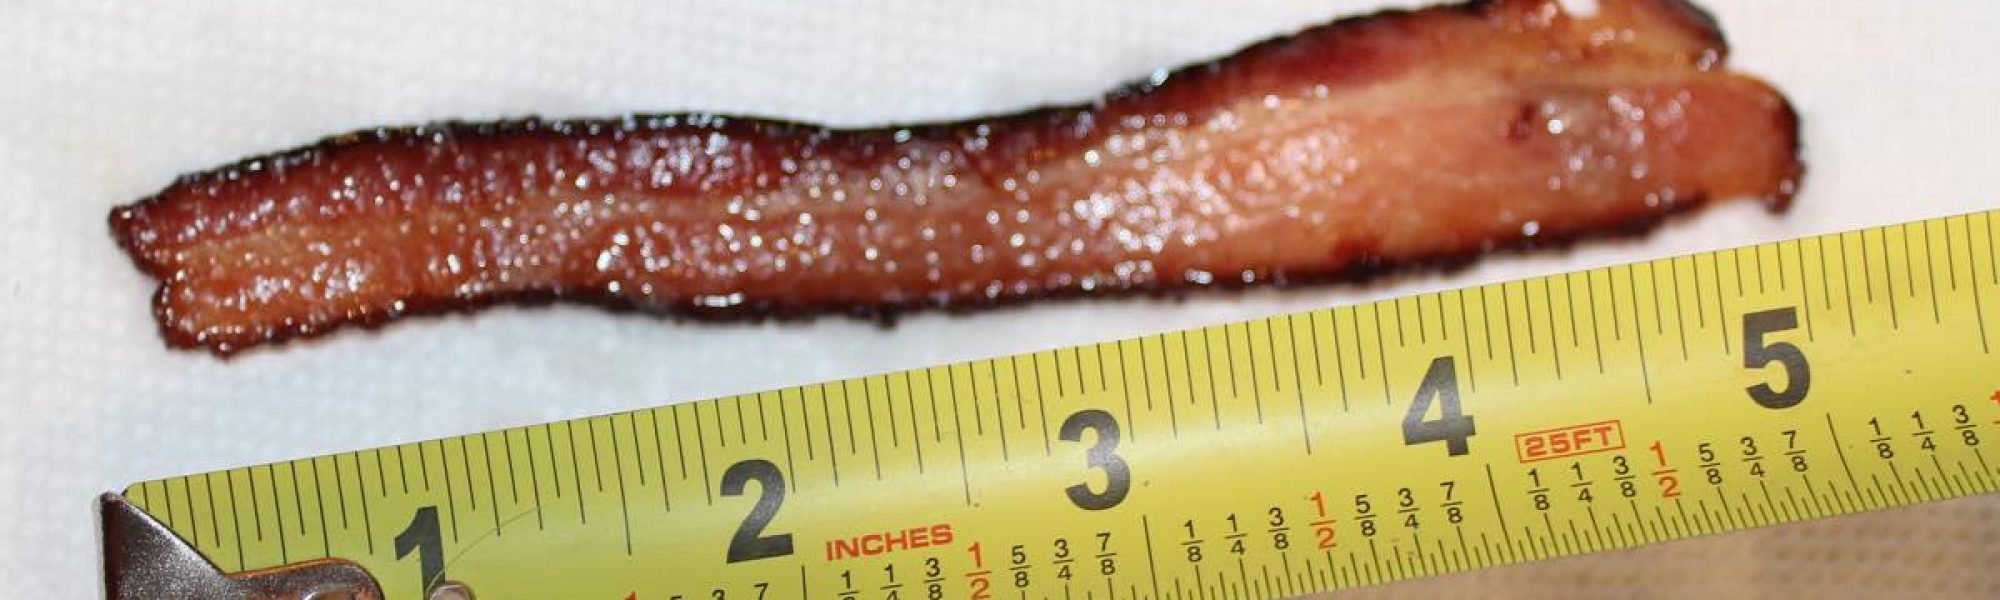 Thrushwood Farms Bacon Cooked Measured